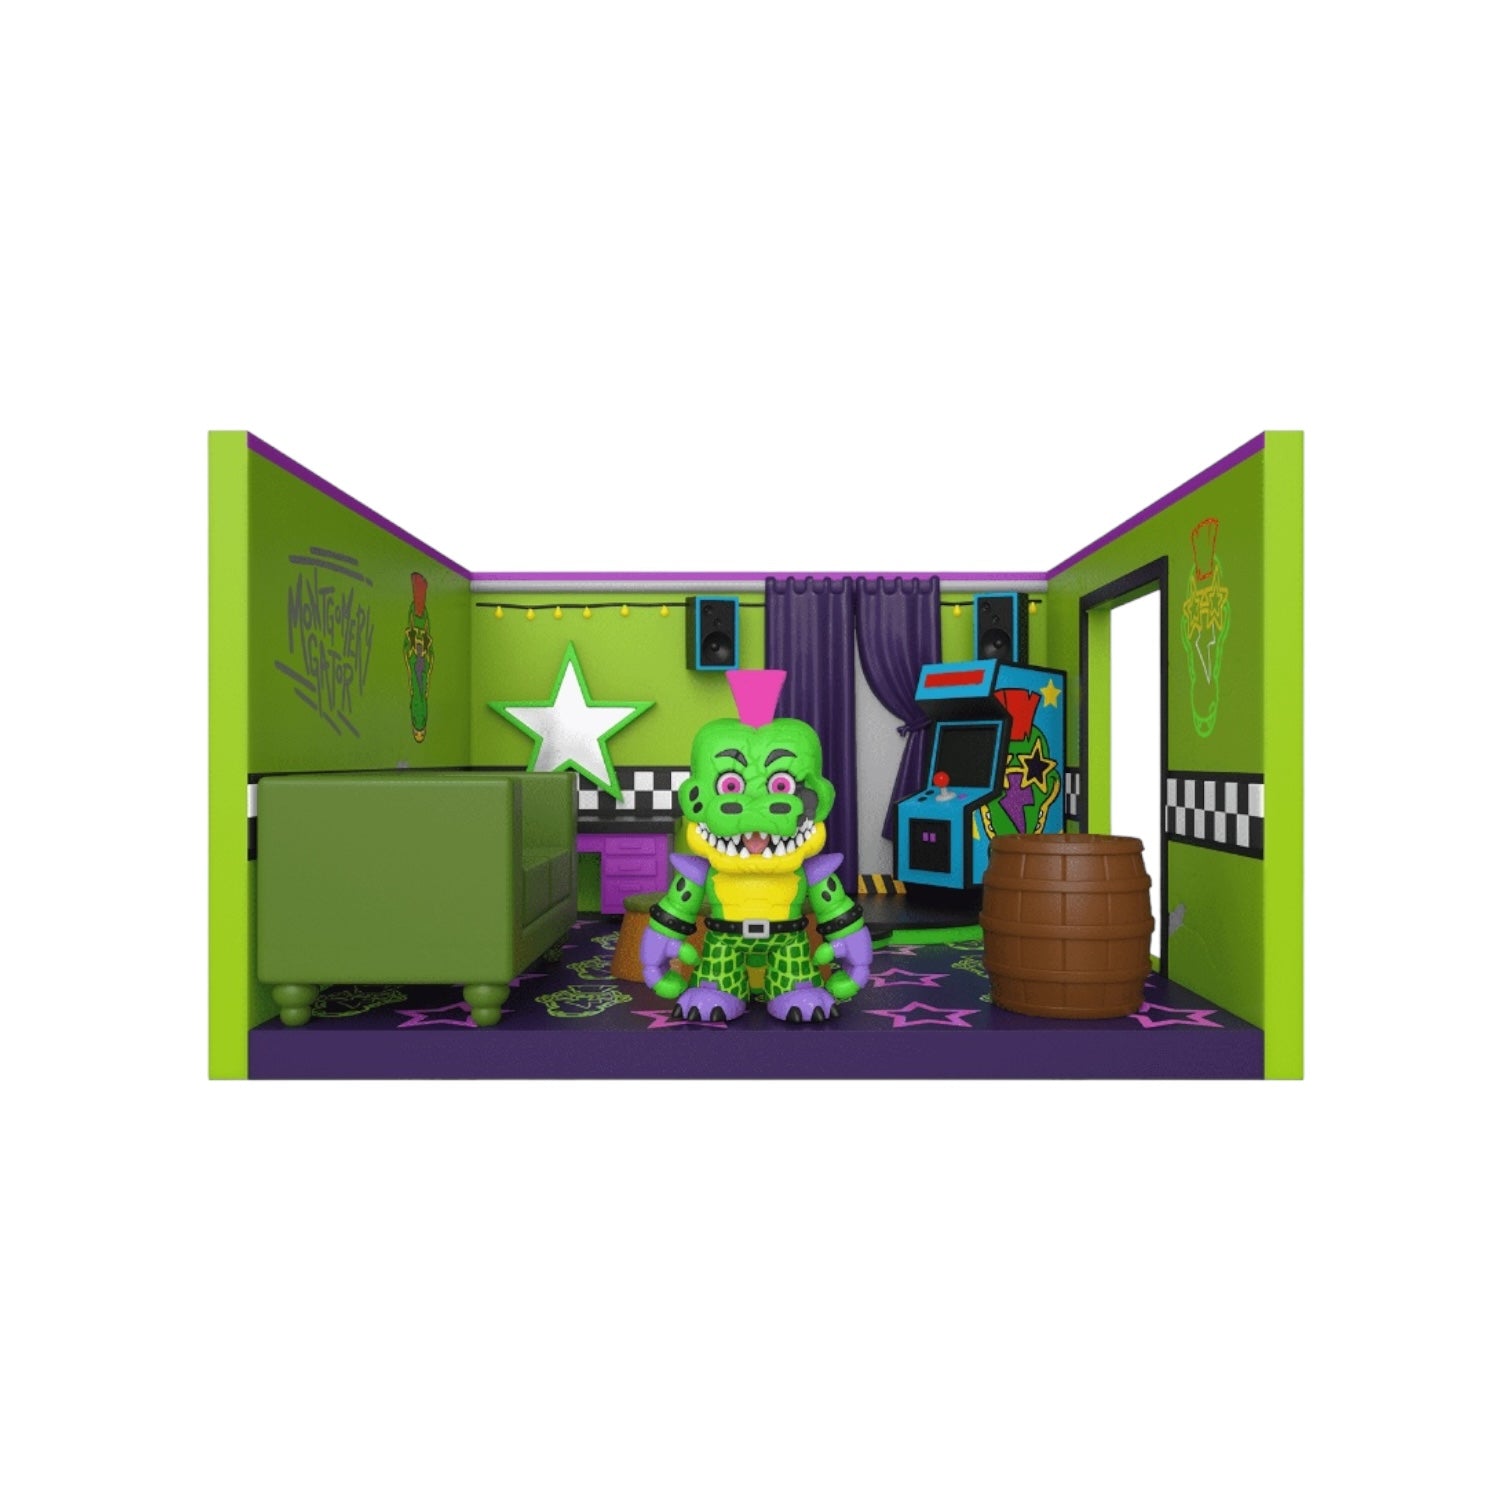 Montgomery Gator with Dressing Room Funko Snaps - Five Nights at Freddy's